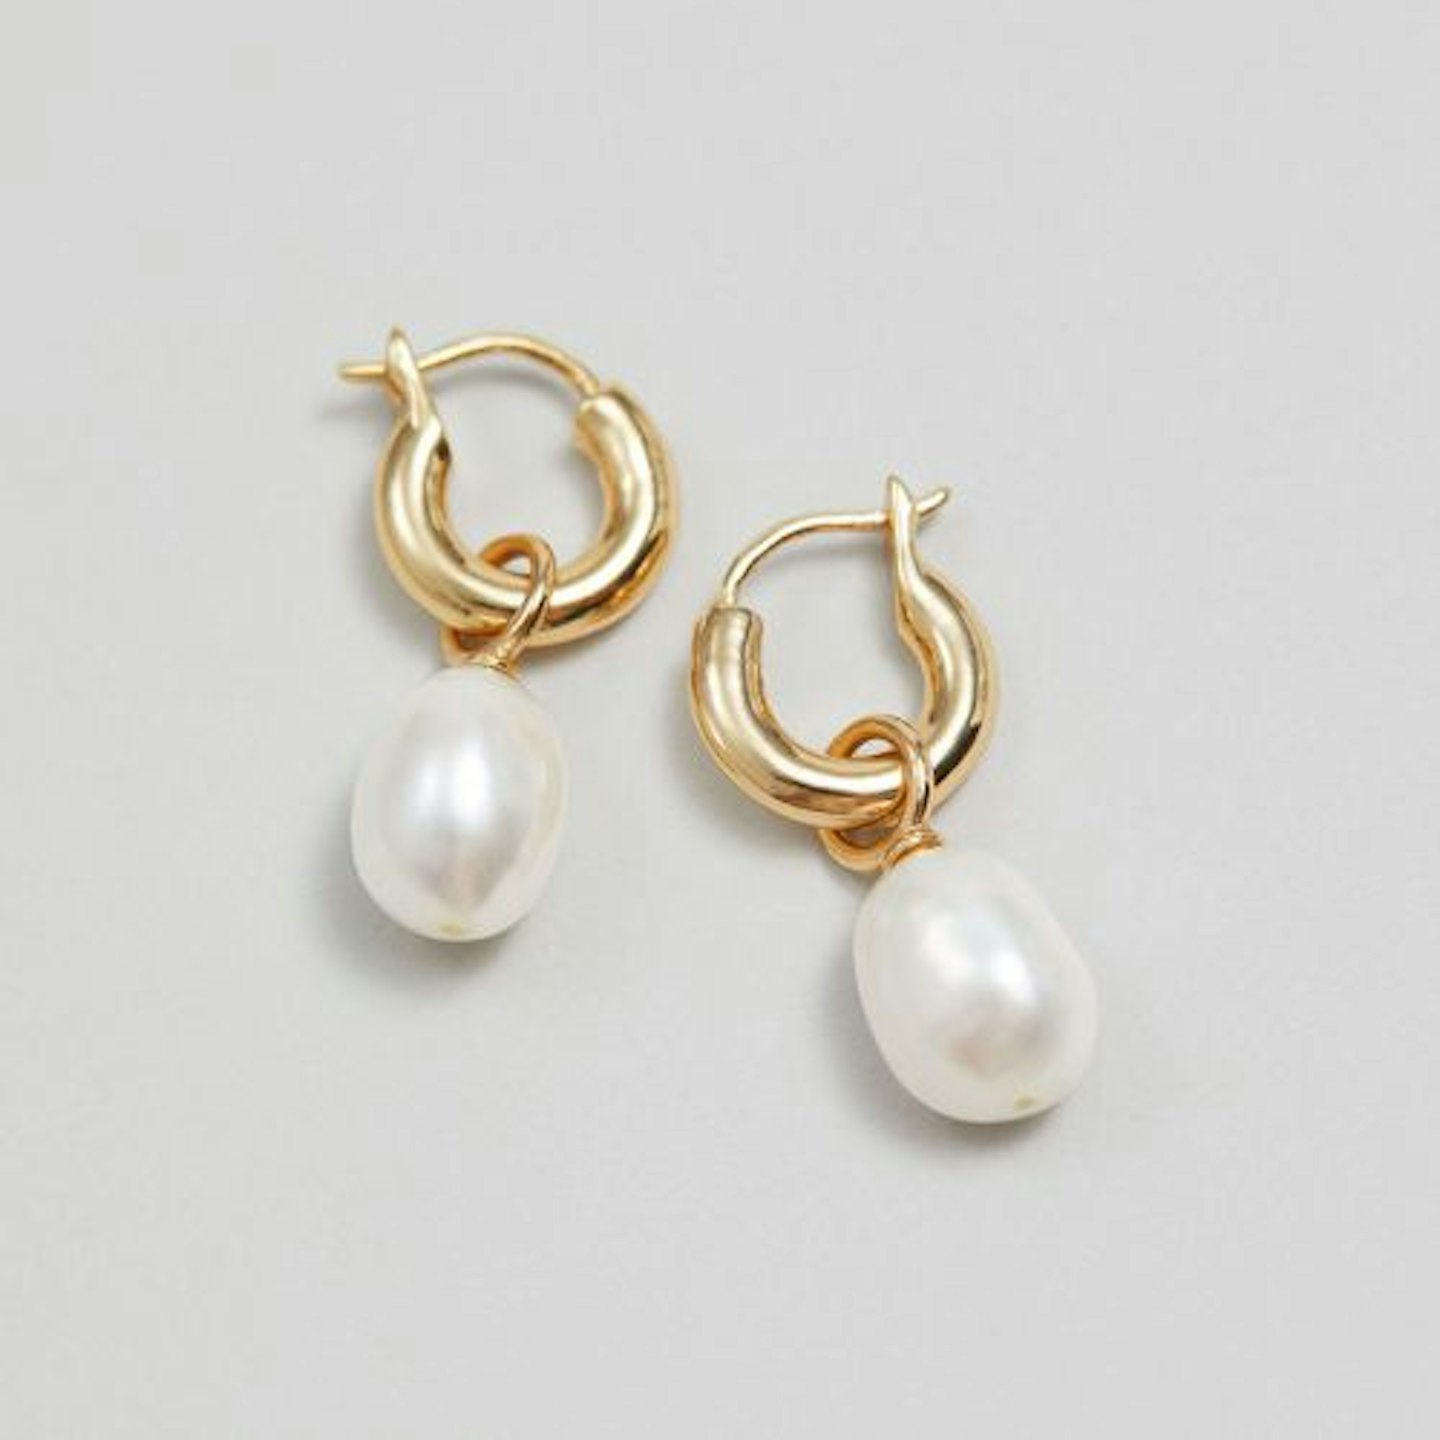 Other Stories, Freshwater Pearl Hoops